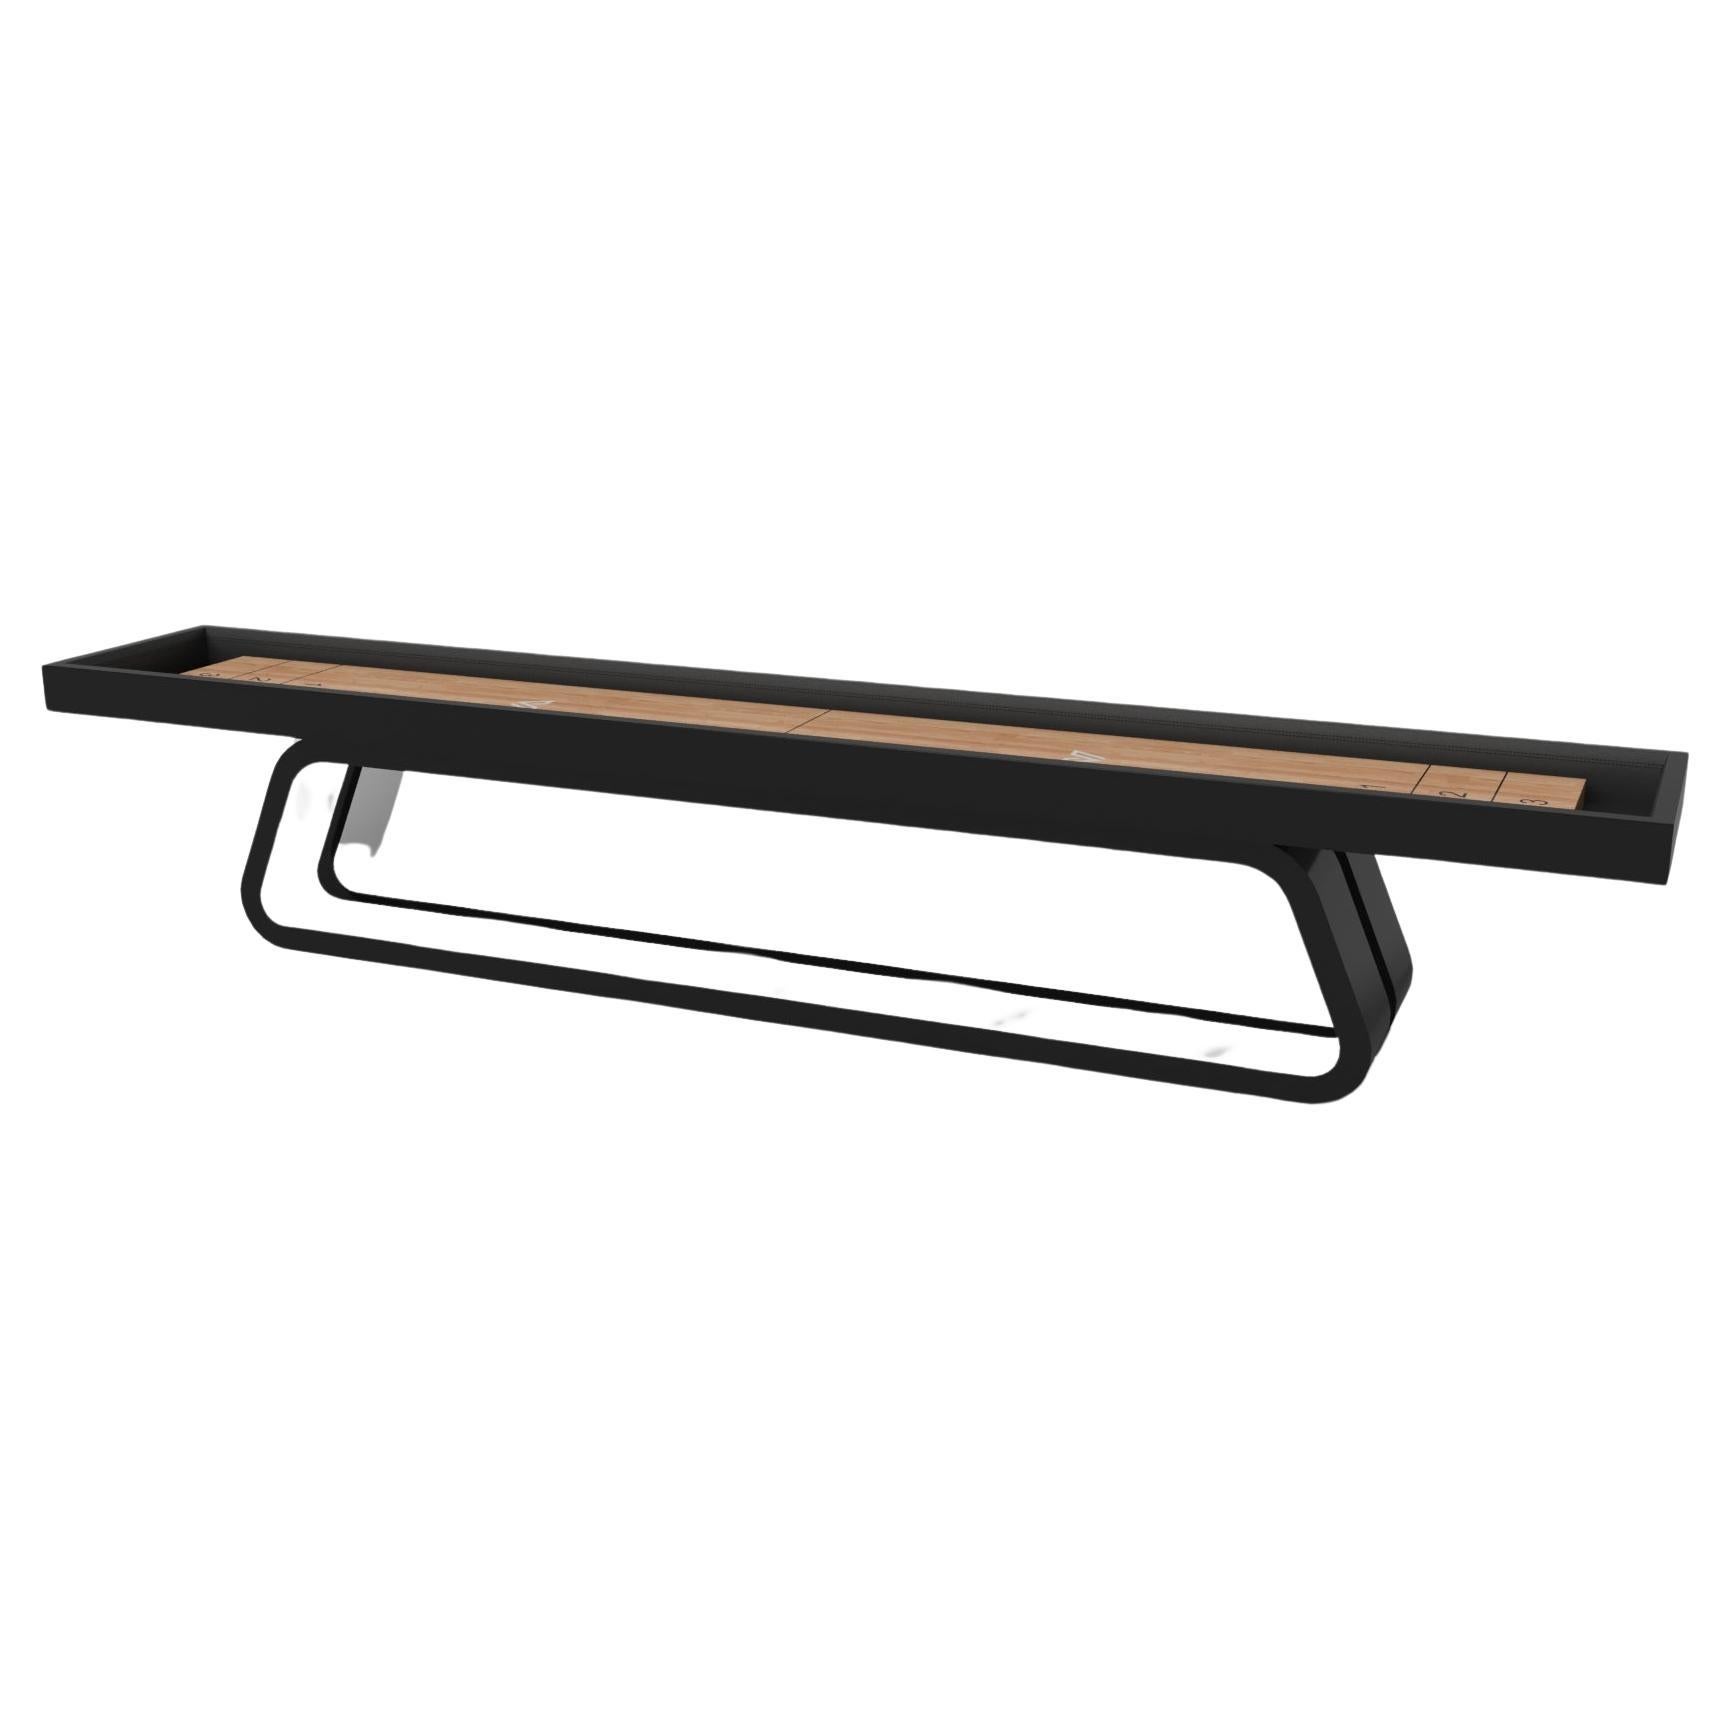 Elevate Customs Luge Shuffleboard Tables / Solid Pantone Black Color in 9' - USA For Sale